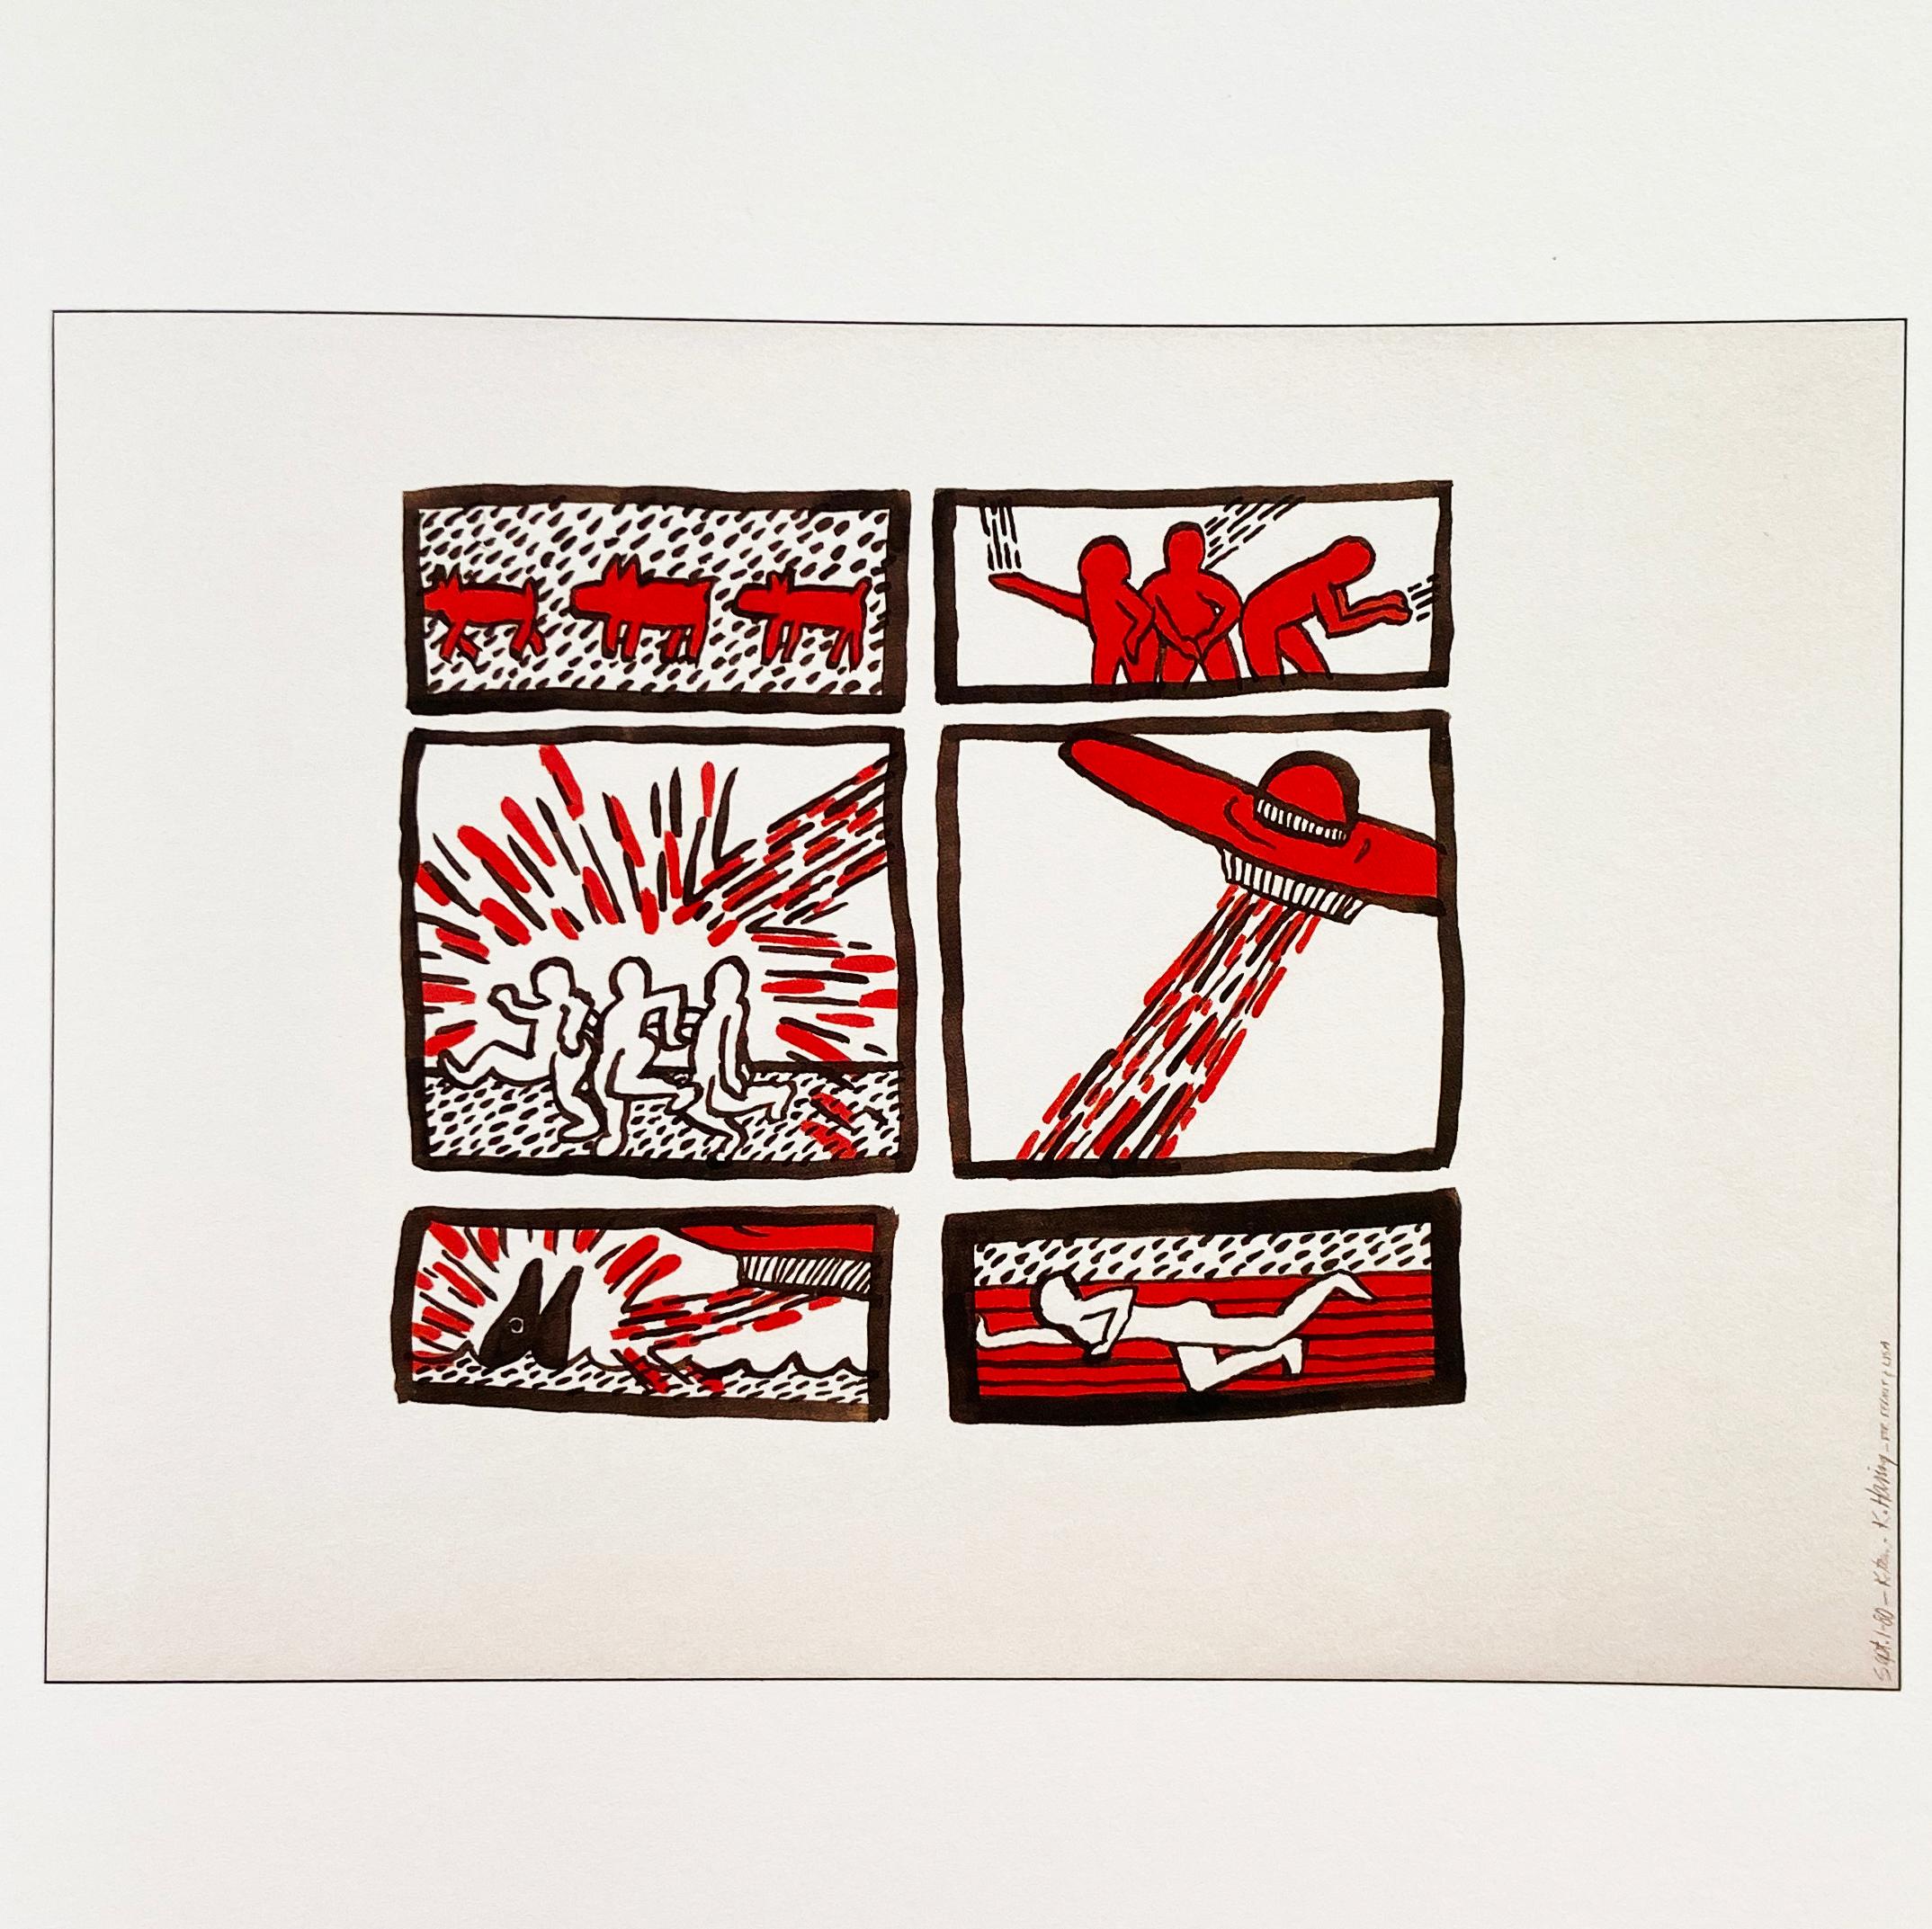 Keith Haring 1990 memorial (announcement + catalog Keith Haring death) - Contemporary Print by (after) Keith Haring